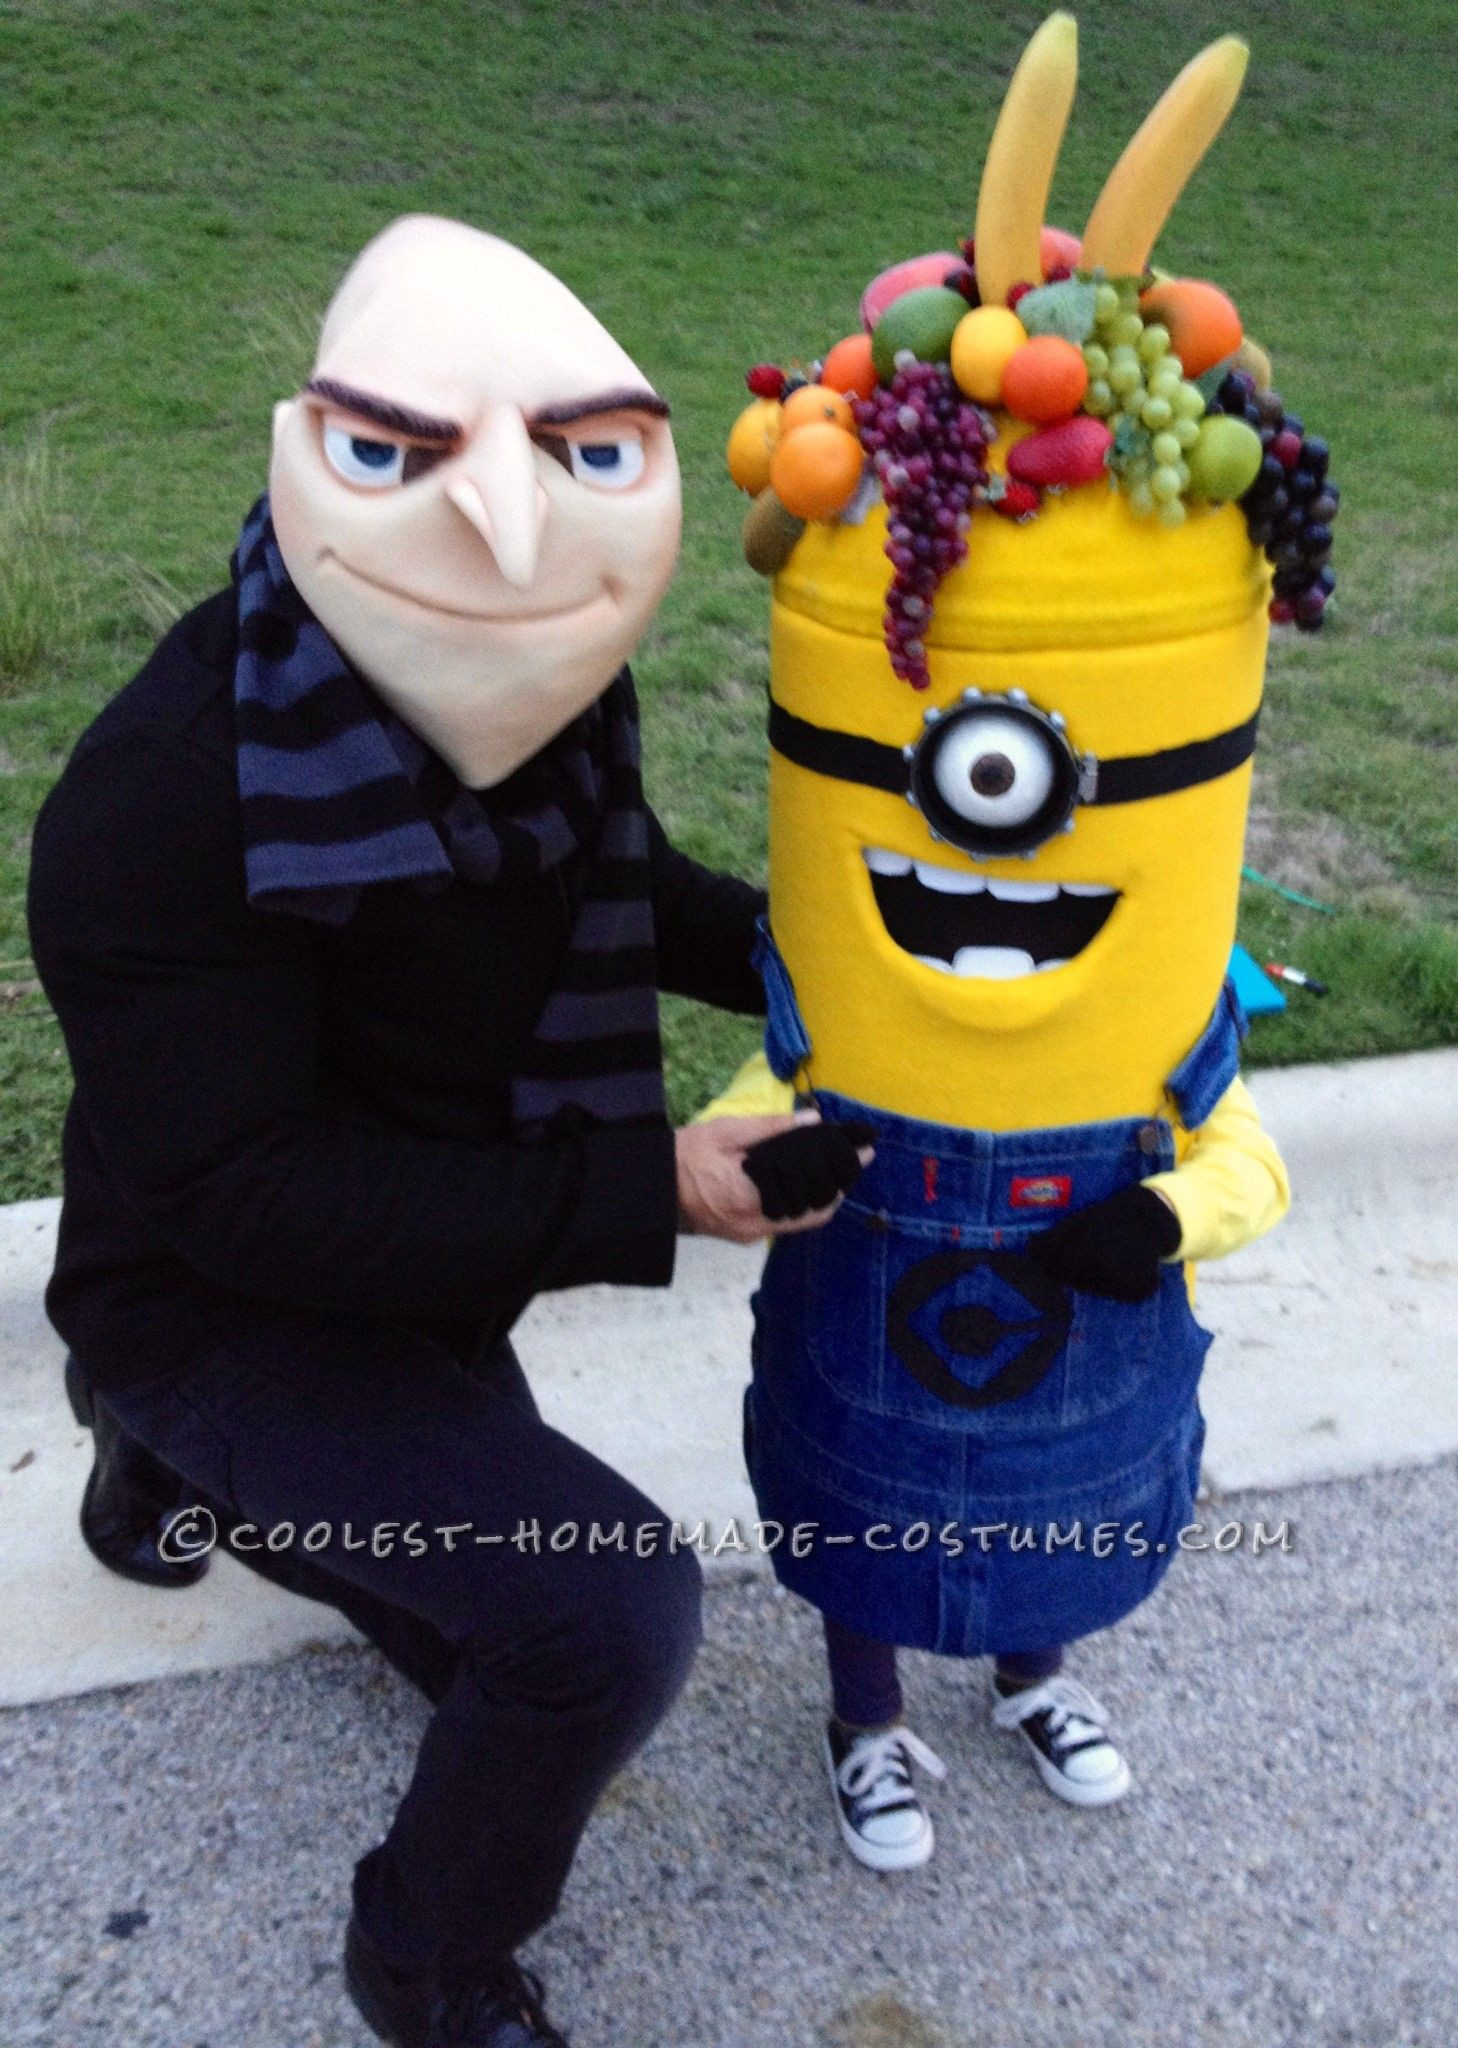 DIY Toddler Minion Costume
 Coolest Carl the Minion Costume for a Toddler